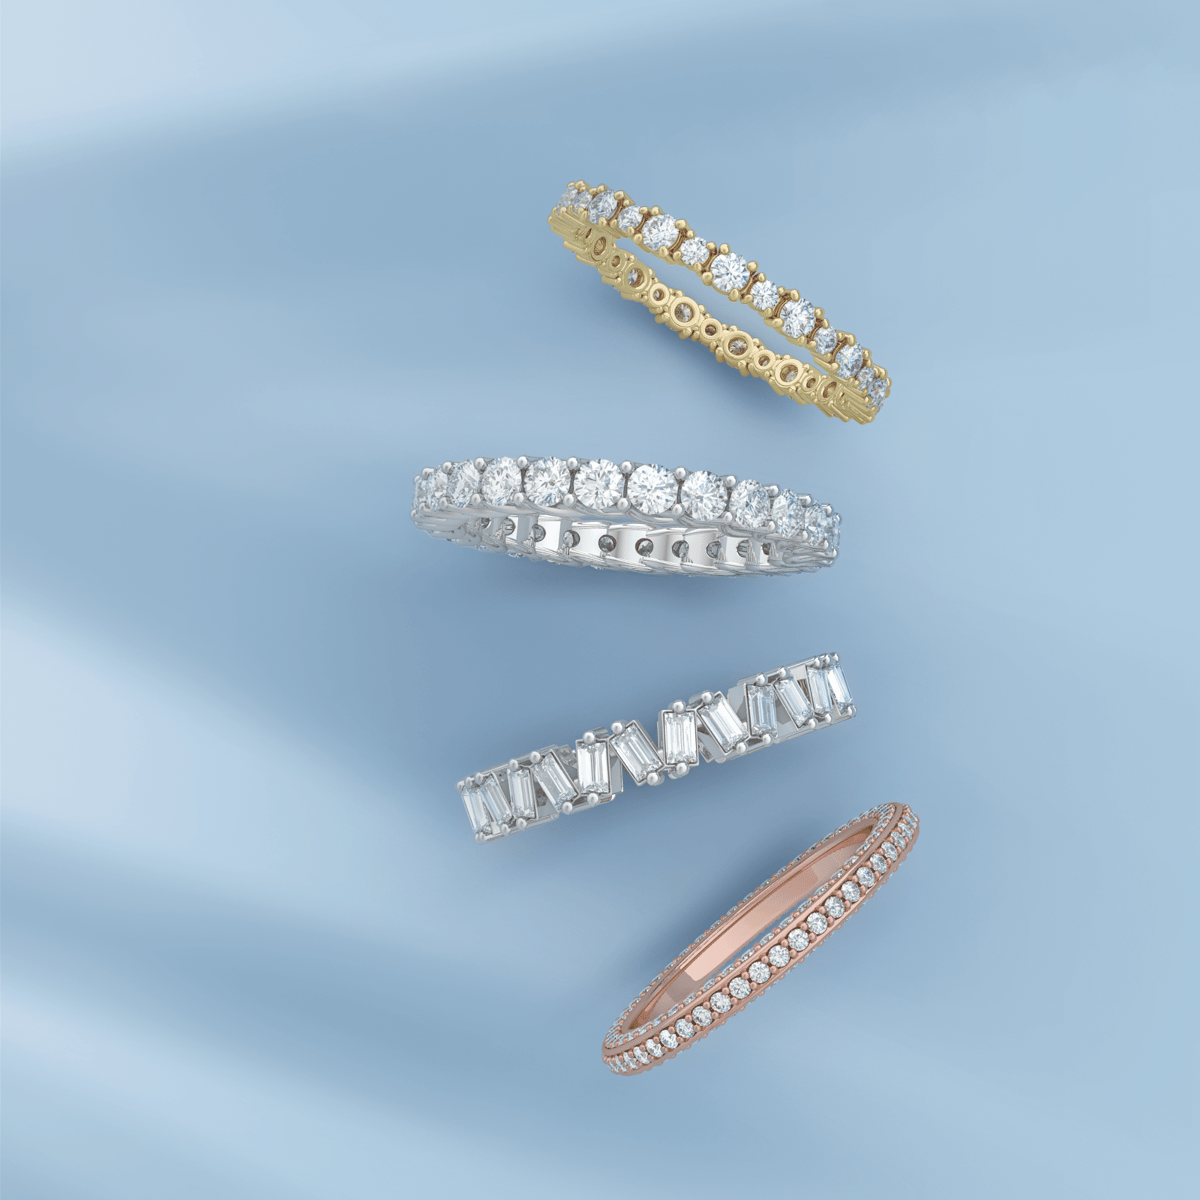 FP Diamond Bands in Yellow, White, or Rose Gold